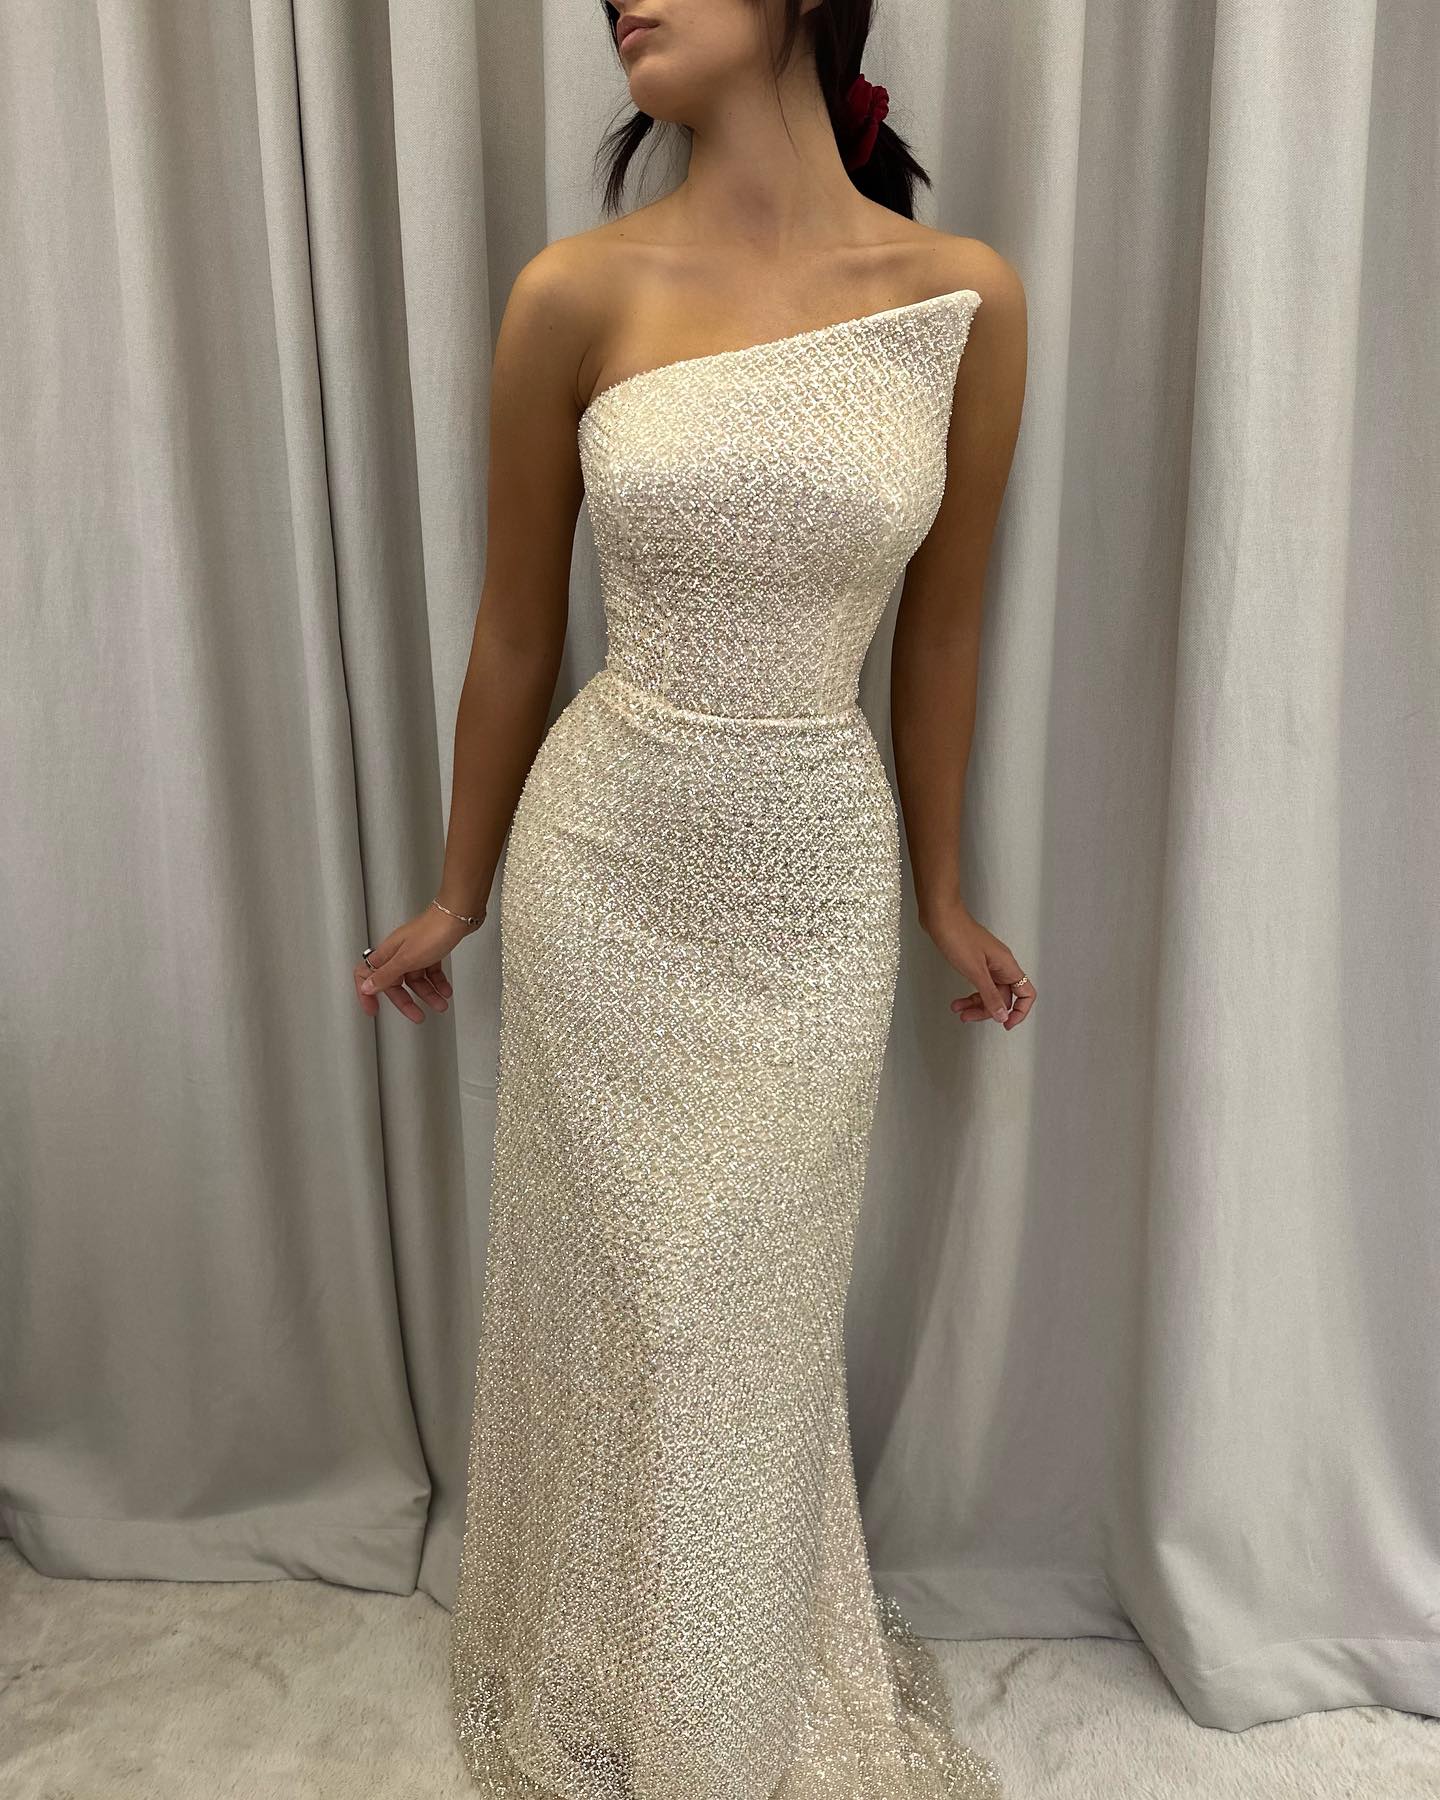 Champagne Sheath Plunging One Shoulder Straps Long Prom Evening Dress QP2917